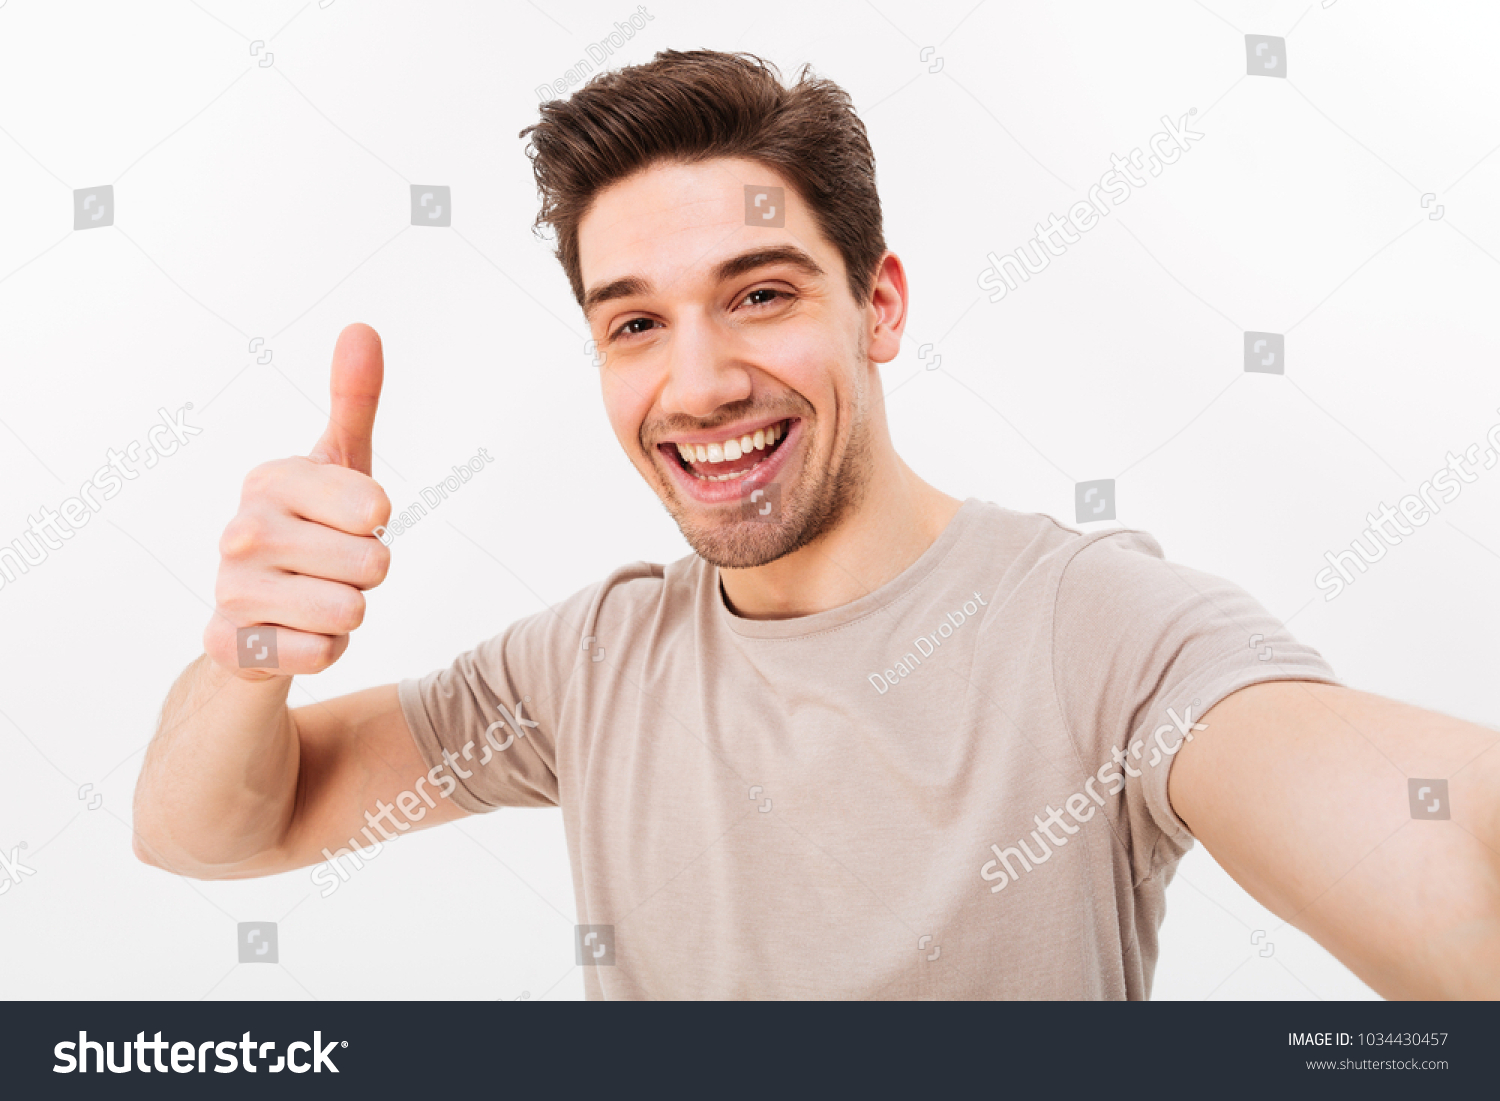 Photo of handsome man in casual t-shirt and bristle on face smiling on camera with thumb up while taking selfie isolated over white background #1034430457